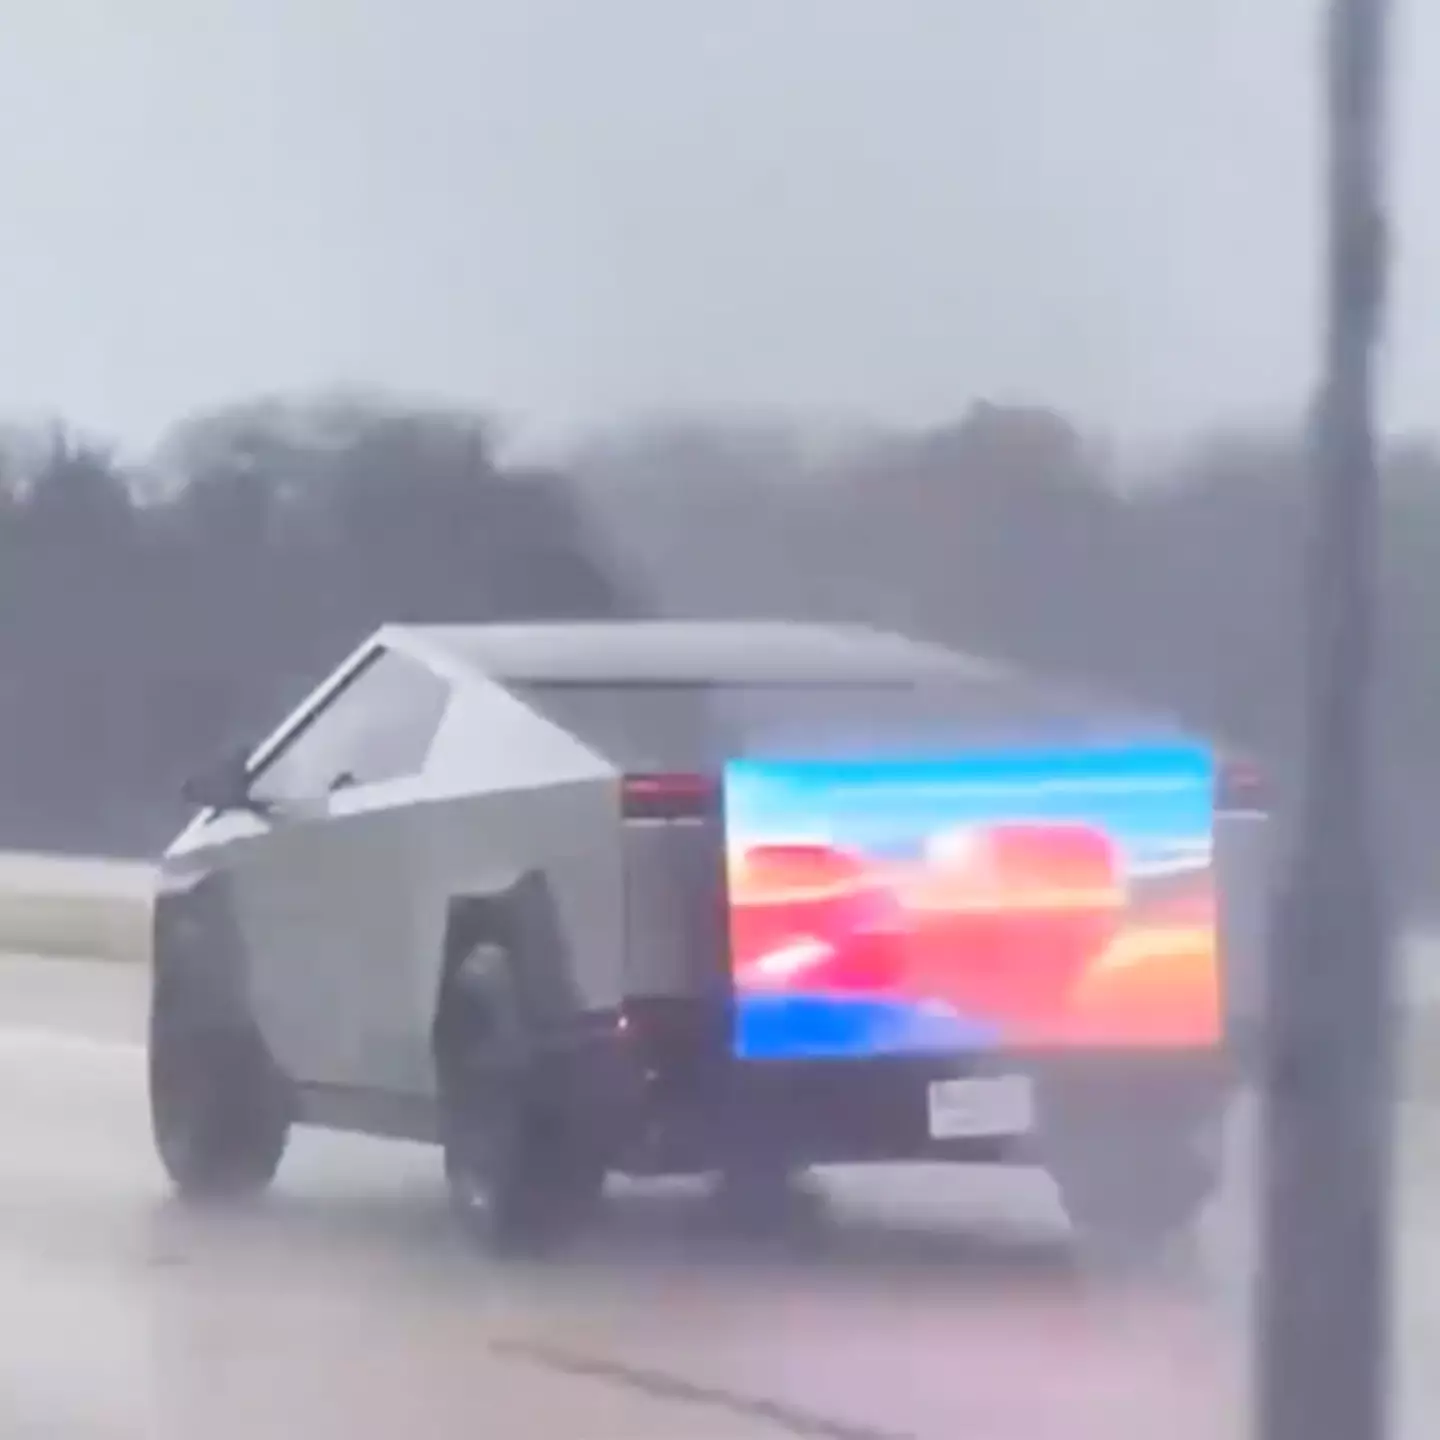 Drivers left baffled after seeing Cybertruck on freeway with TV on the back